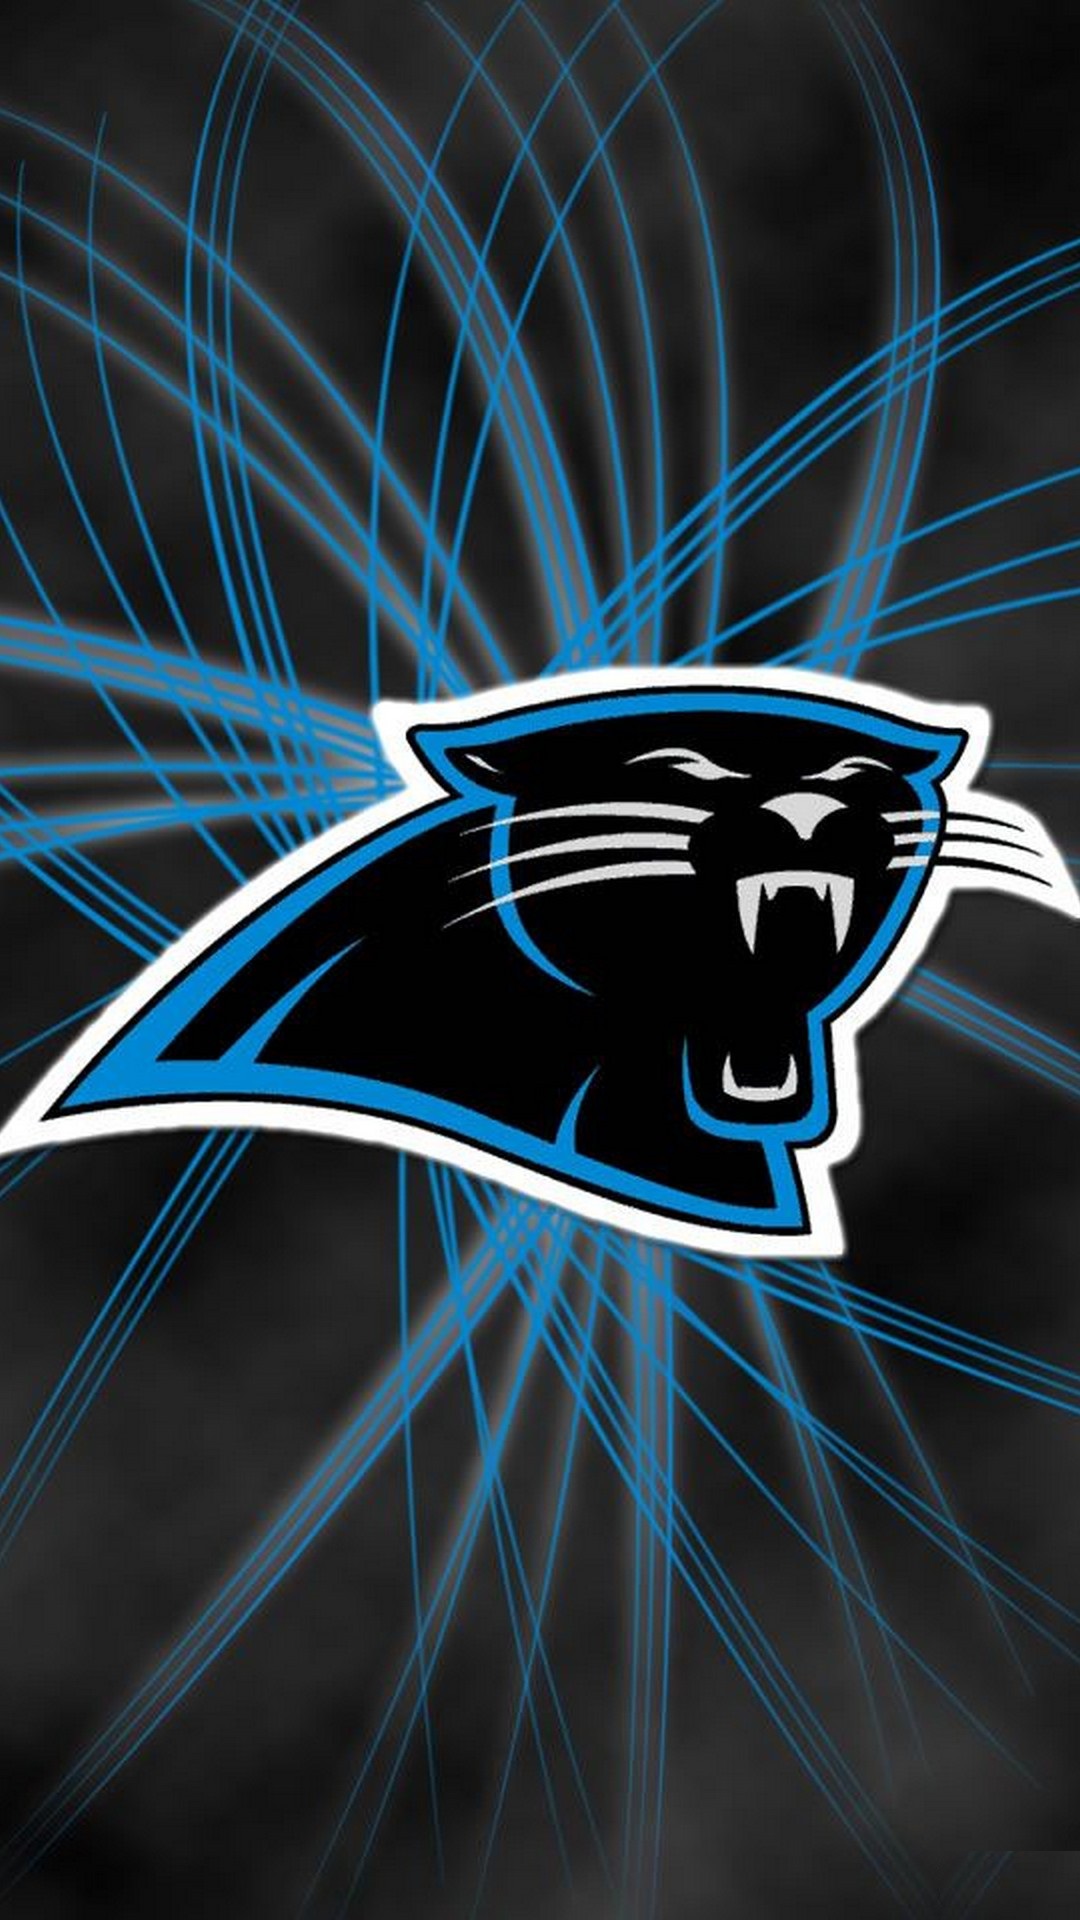 Carolina Panthers iPhone Wallpaper High Quality With high-resolution 1080X1920 pixel. Donwload and set as wallpaper for your iPhone X, iPhone XS home screen backgrounds, XS Max, XR, iPhone8 lock screen wallpaper, iPhone 7, 6, SE, and other mobile devices